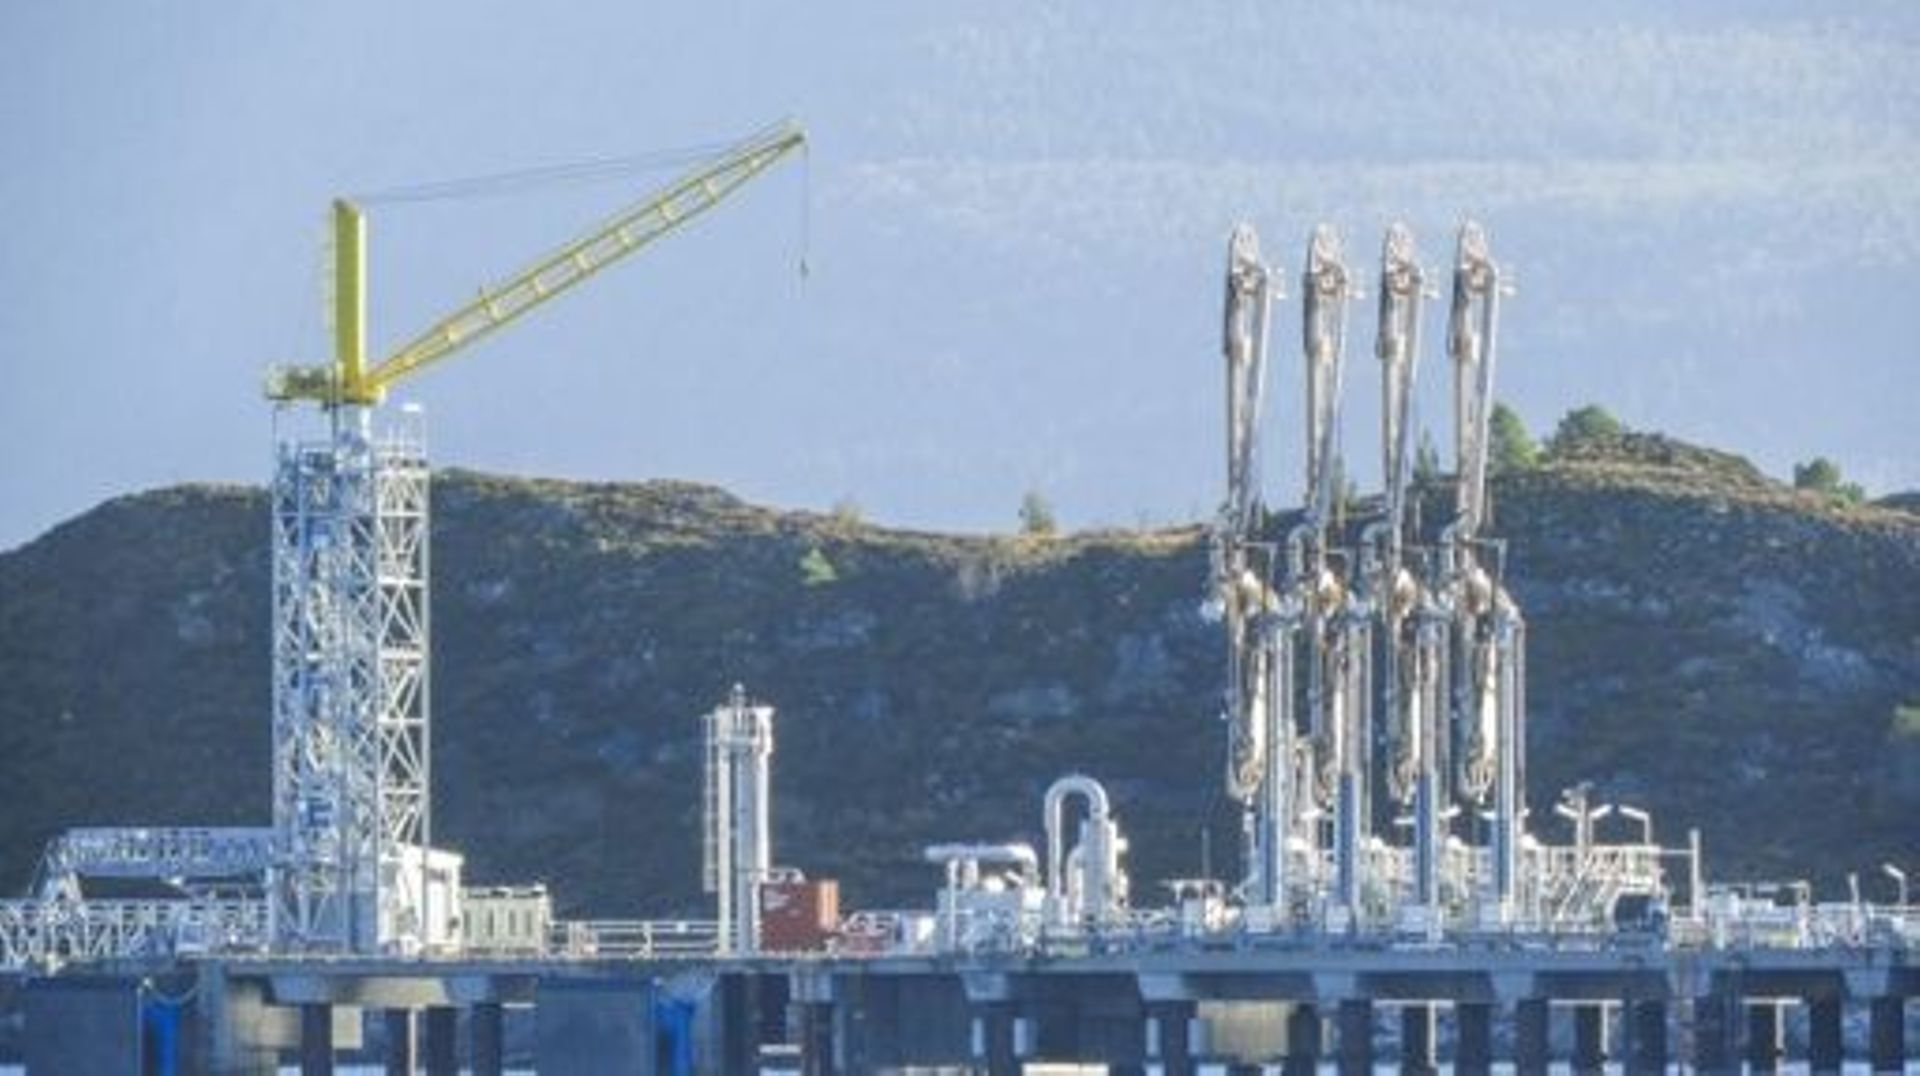 The Ormen Lange land plant, or Nyhamna gas plant in Aukra, which receives and processes gas from the Ormen Lange field in the Norwegian Sea is seen on October 13, 2022. A major natural gas processing plant in western Norway, a vital source of supply to t